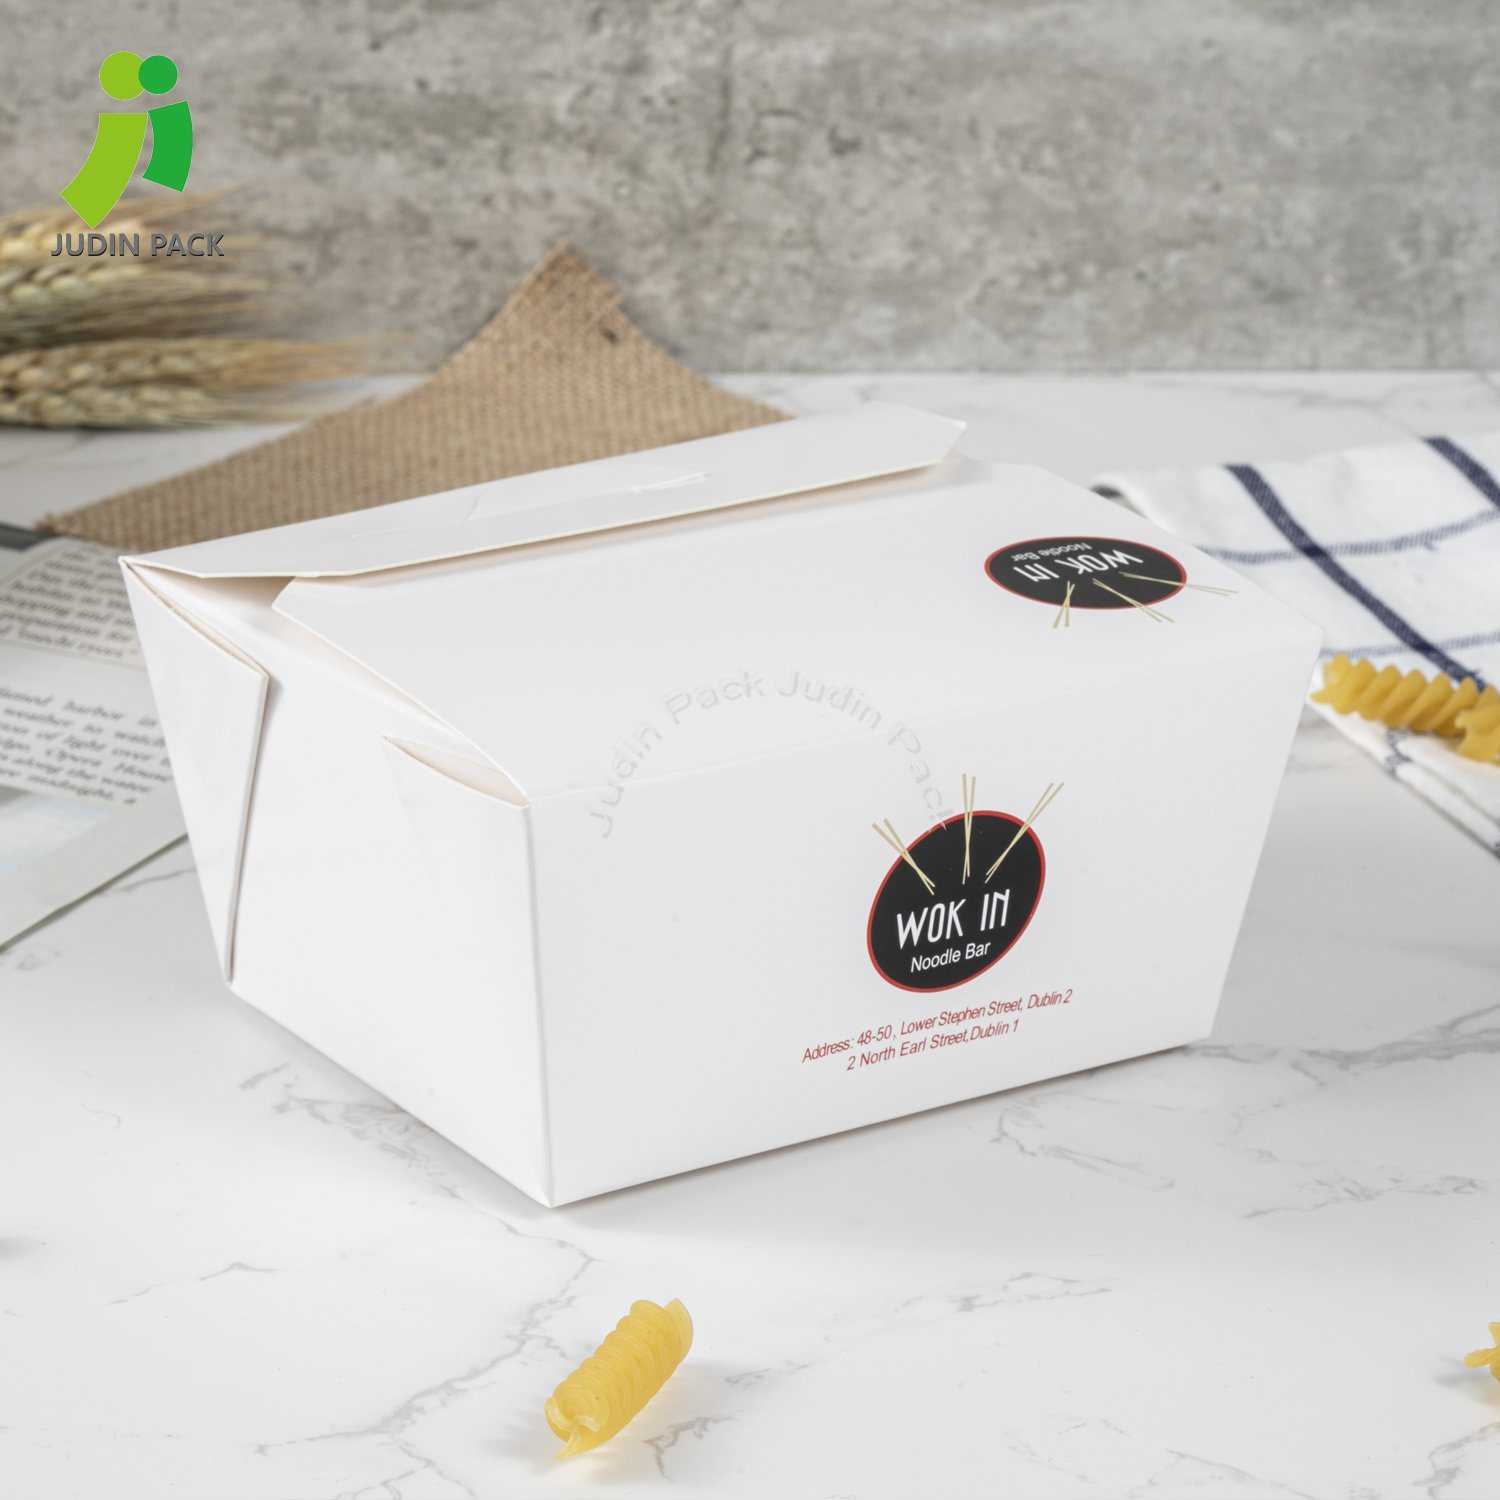 Takeaway Food Box for Takeout Box Fast Food Restaurants